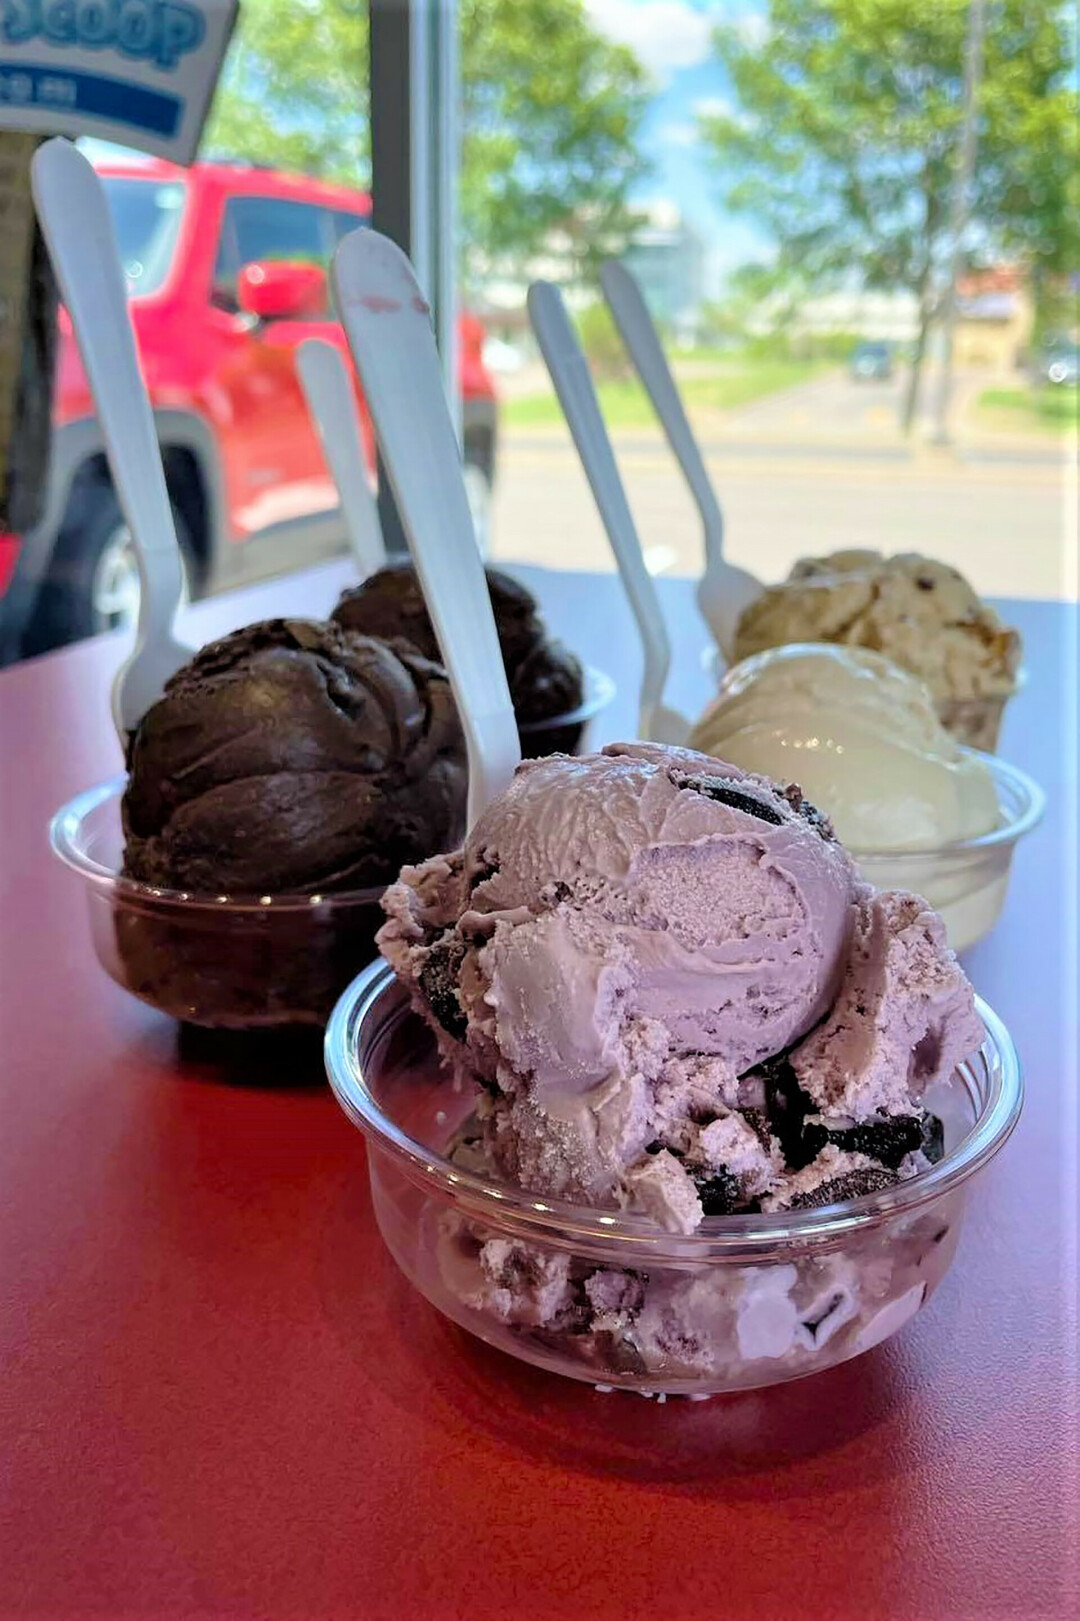 MONSTROUS SCOOPS. Monster Scoop Ice Cream is a relatively new addition to the Chippewa Valley ice cream scene, as it opened in 2021 in both Chippewa Falls and Eau Claire. (Photo by Kellie Williams)